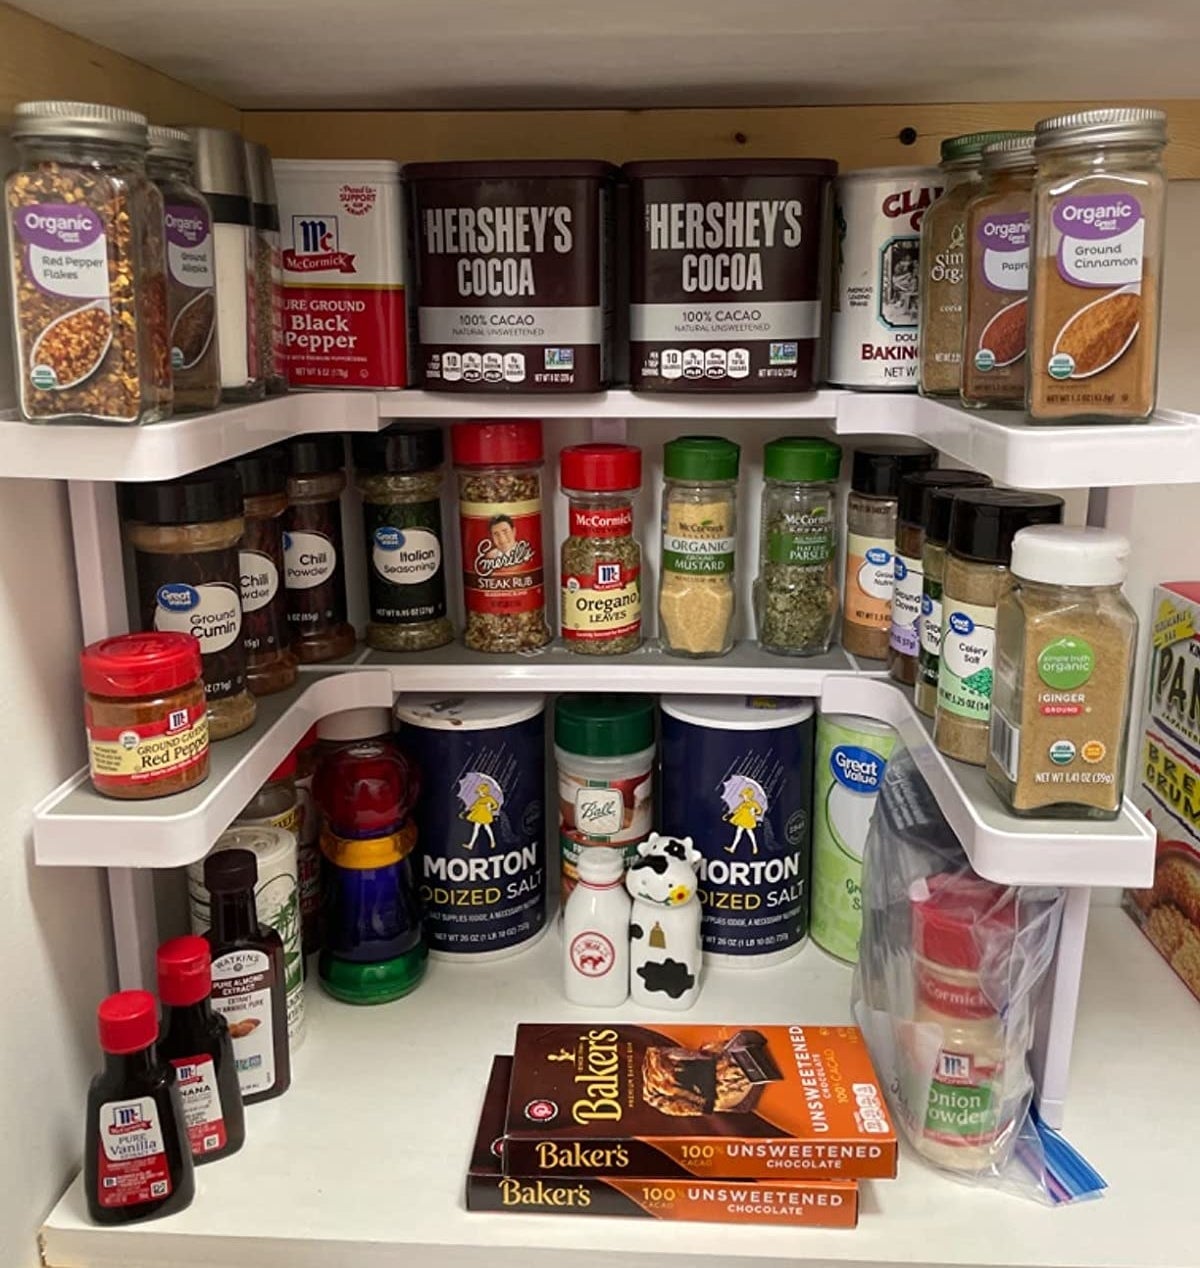 Reviewer image of spice rack filled with spices and pantry items on a shelf